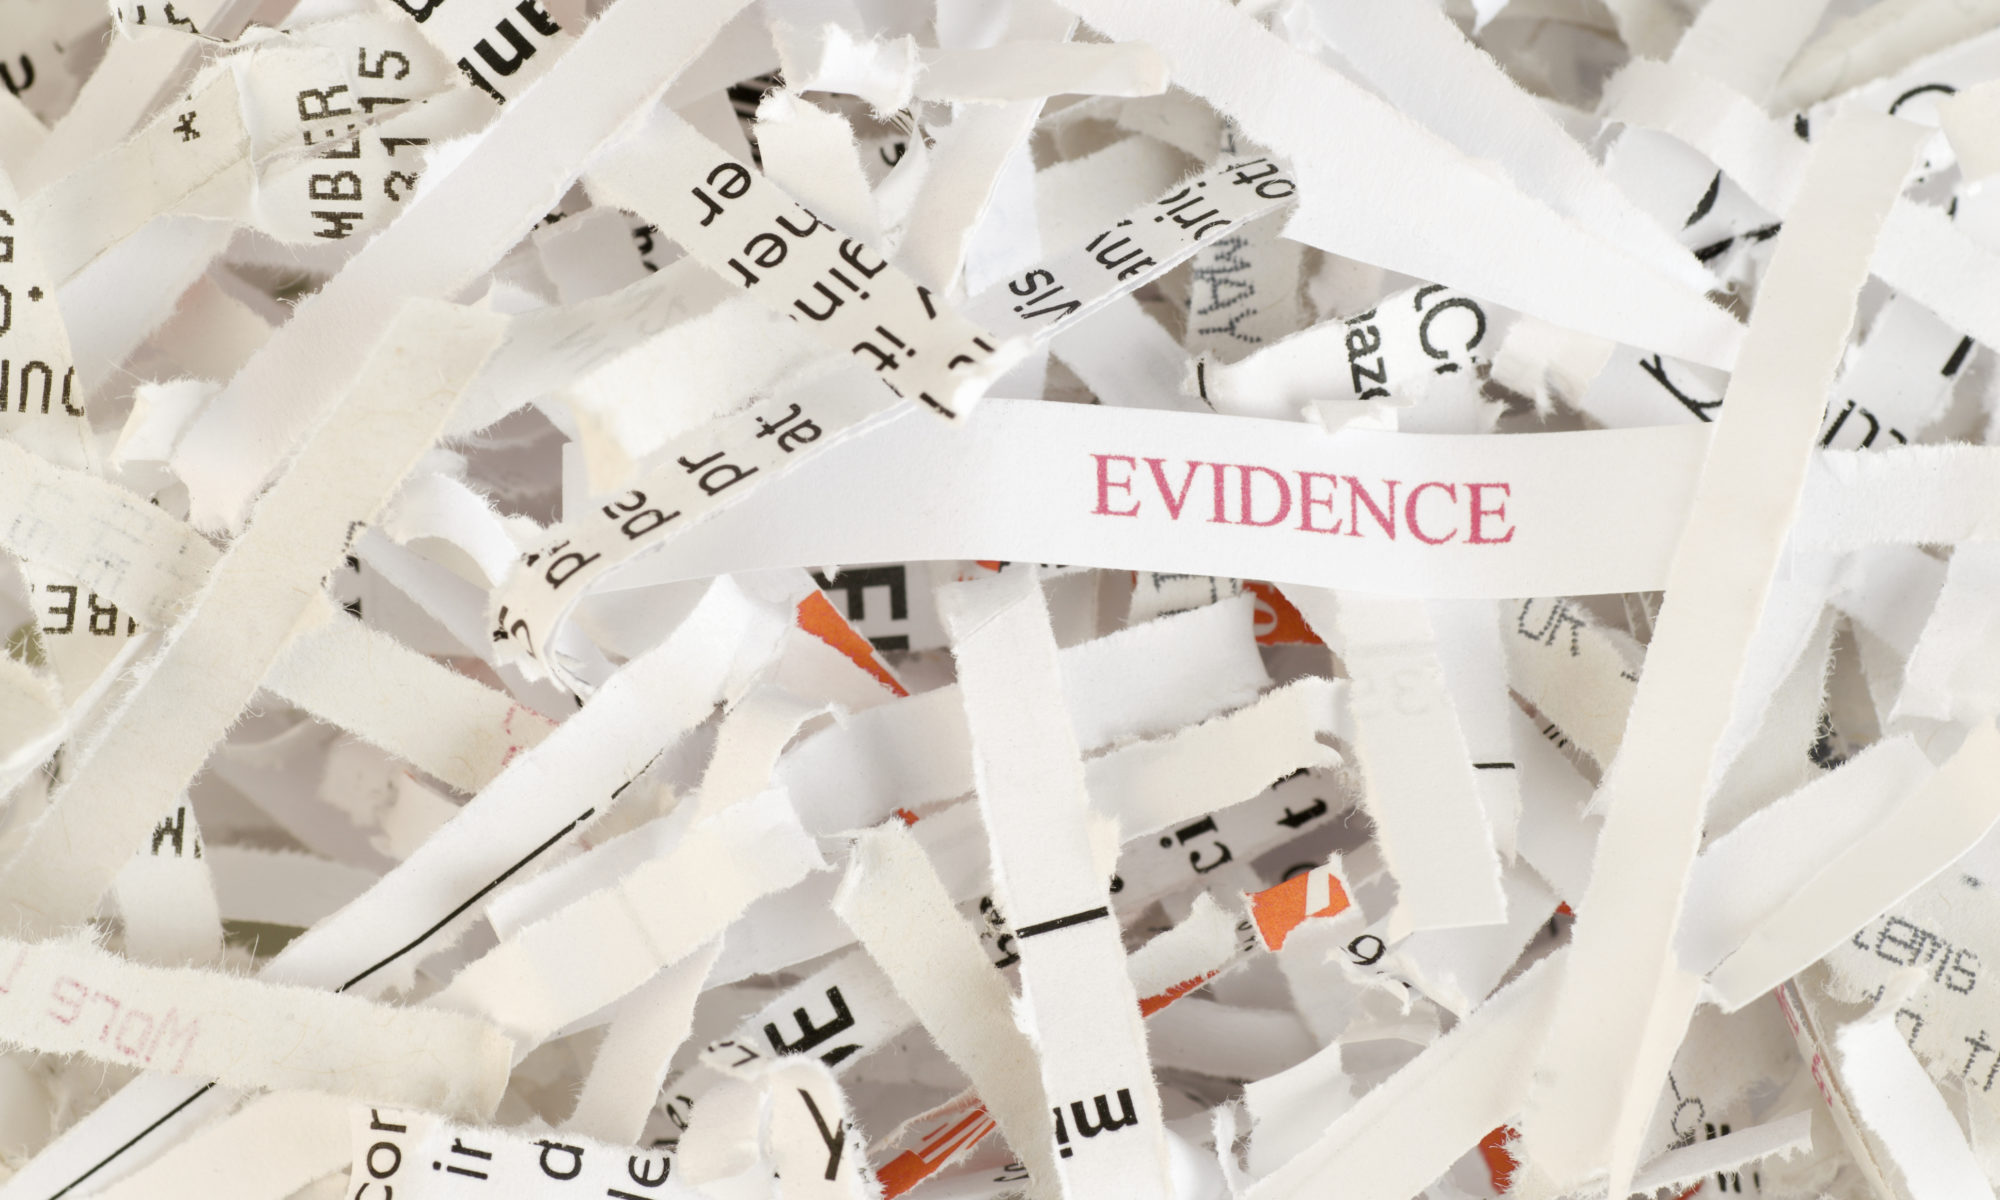 Shredded paper with the word EVIDENCE written on one of the pieces of paper demonstrating evidence destruction and possible obstruction of justice